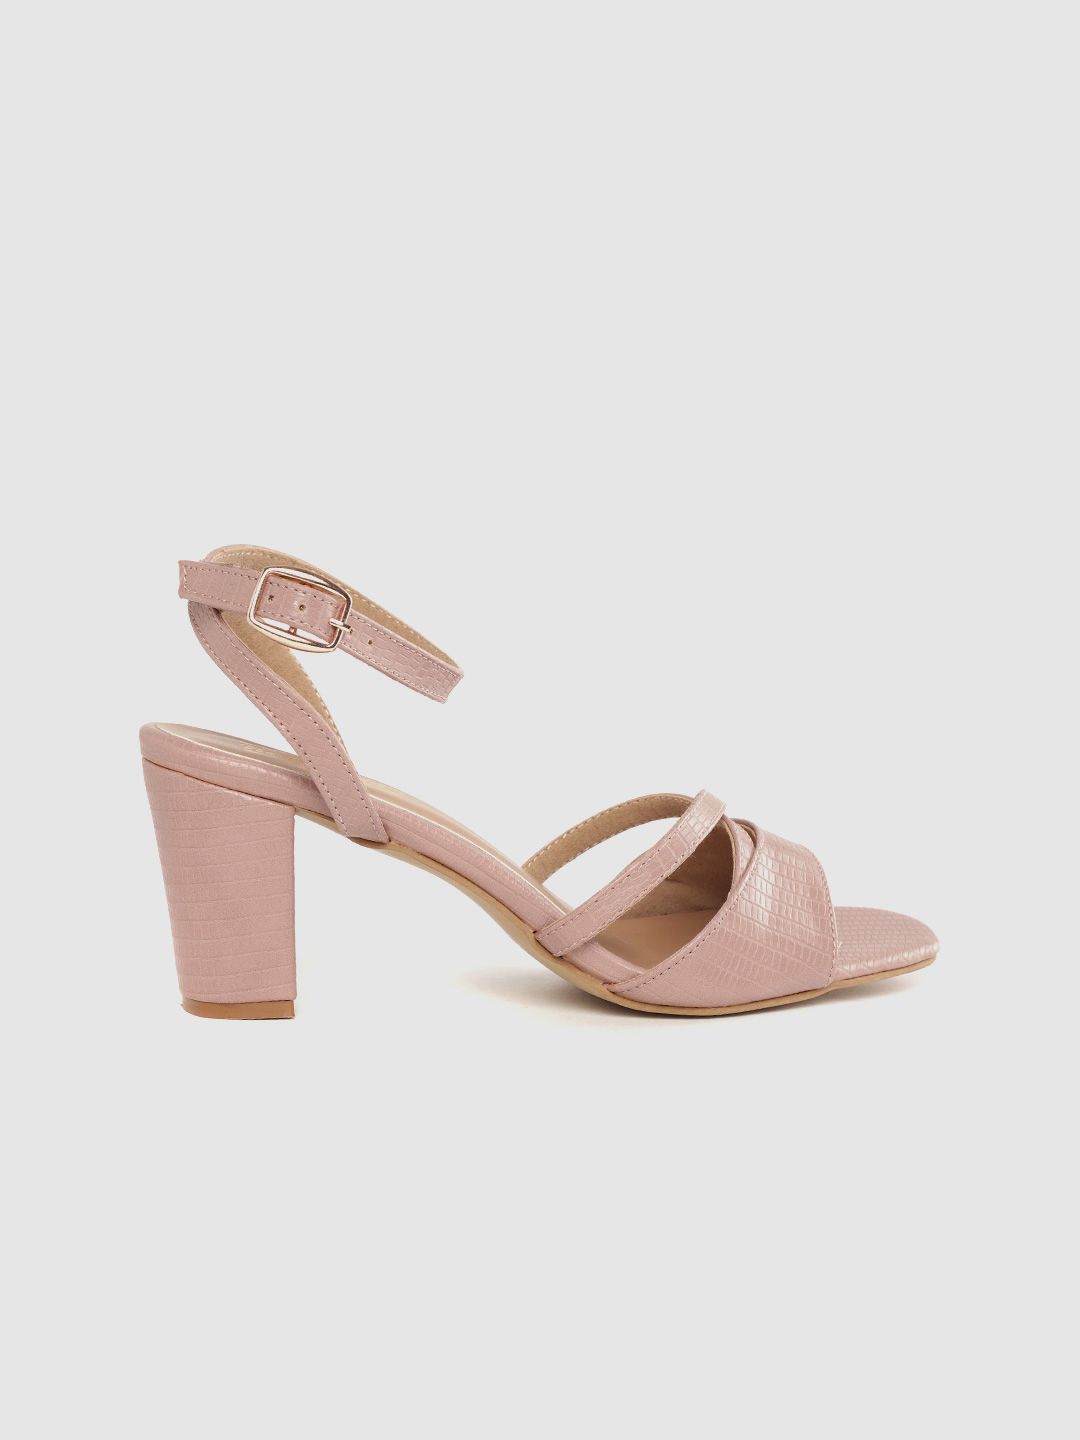 The Roadster Lifestyle Co Women Peach-Coloured Snakeskin Textured Mid-Top Block Heels Price in India